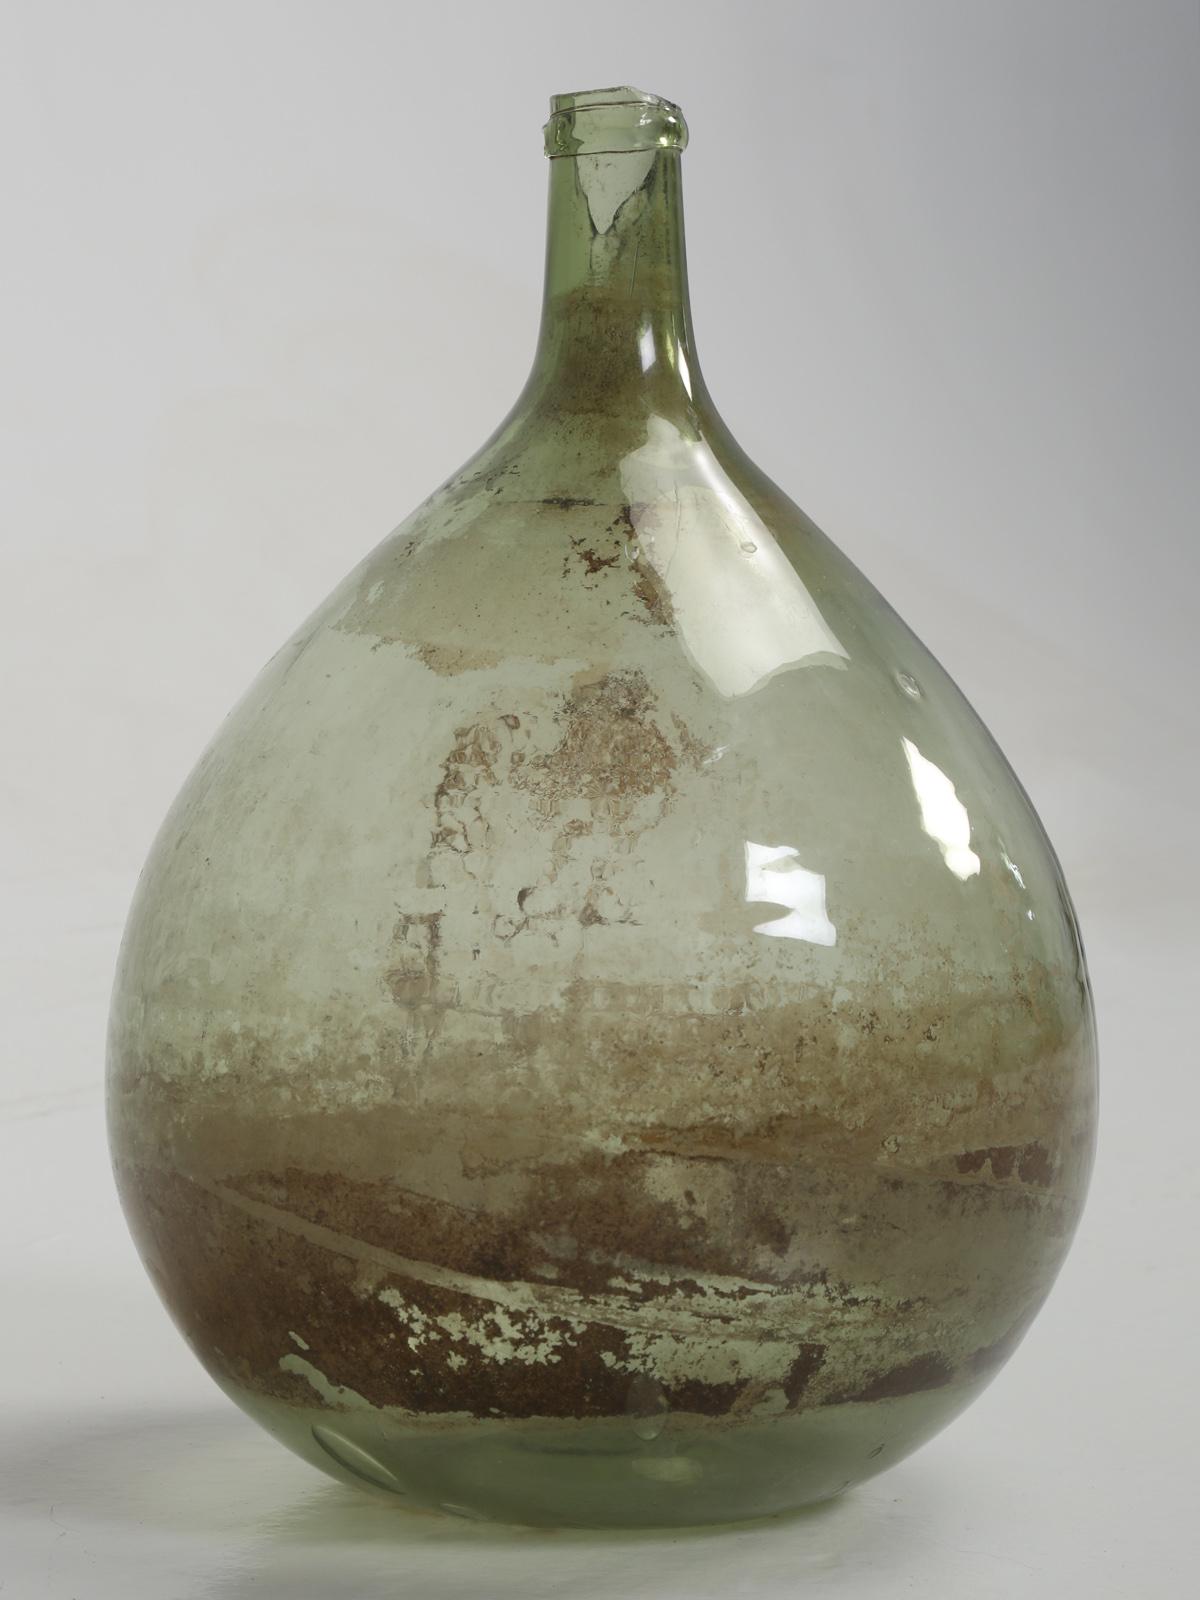 Antique French demijohn, but please note, that there is a missing piece of glass at the very top, but only on one side, so the demijohn can still be used for decorative purposes.